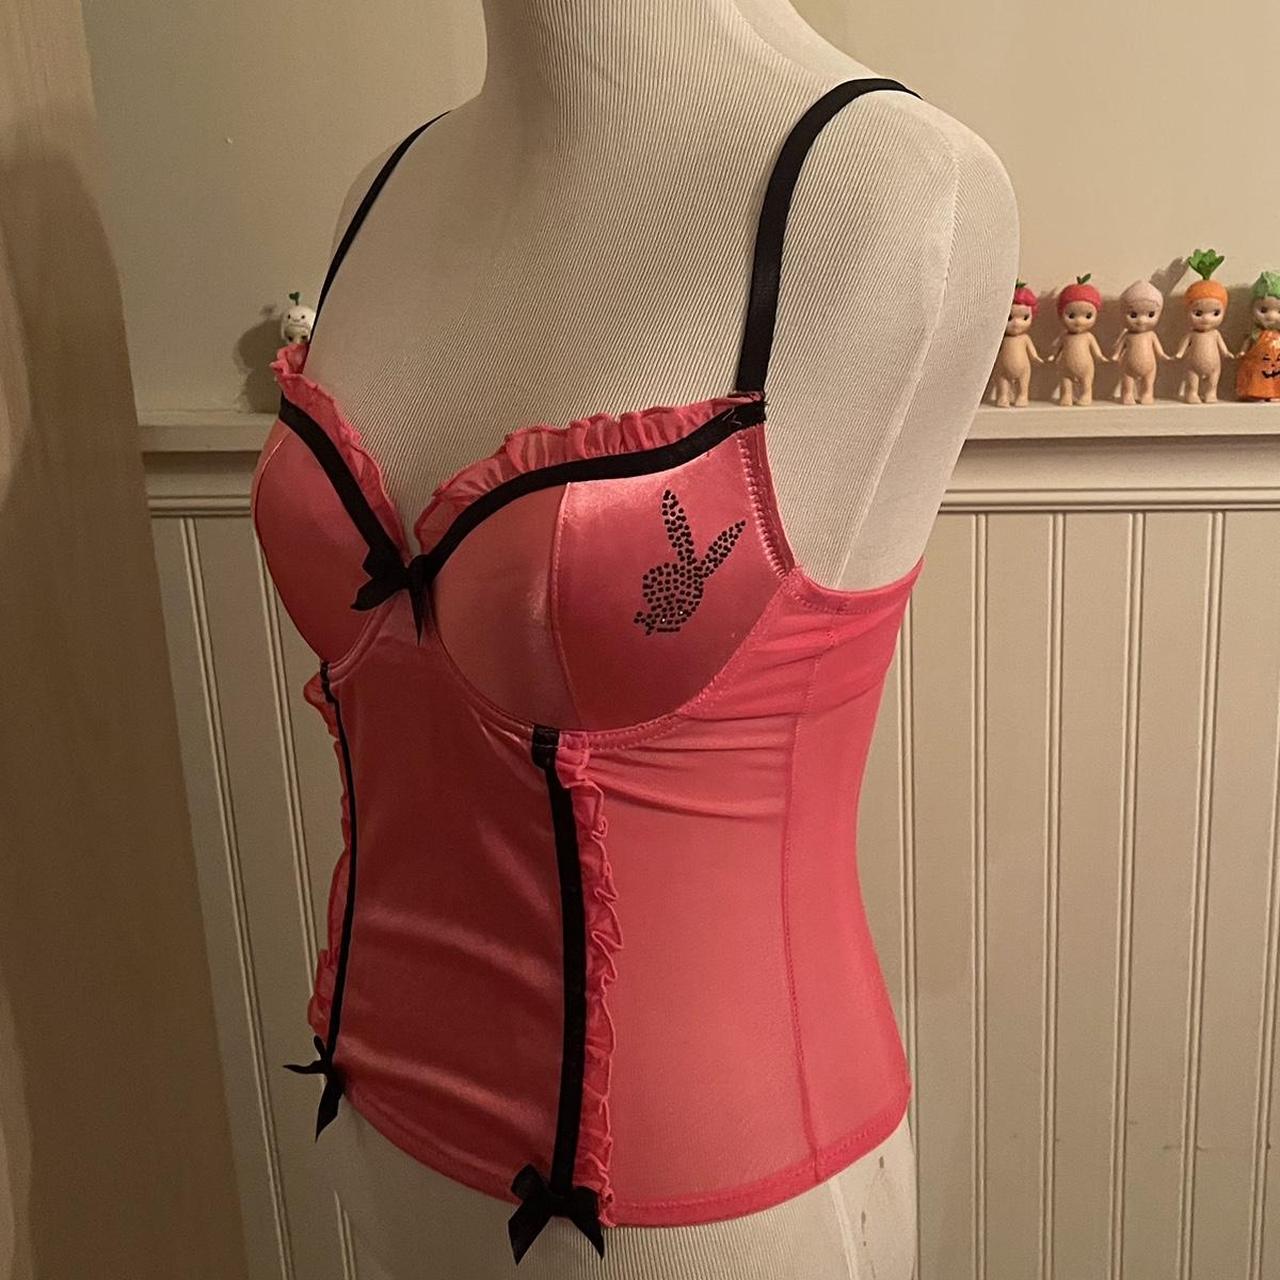 PLAYBOY INTIMATES BUSTIER CORSET TOP, ~, tucked in in